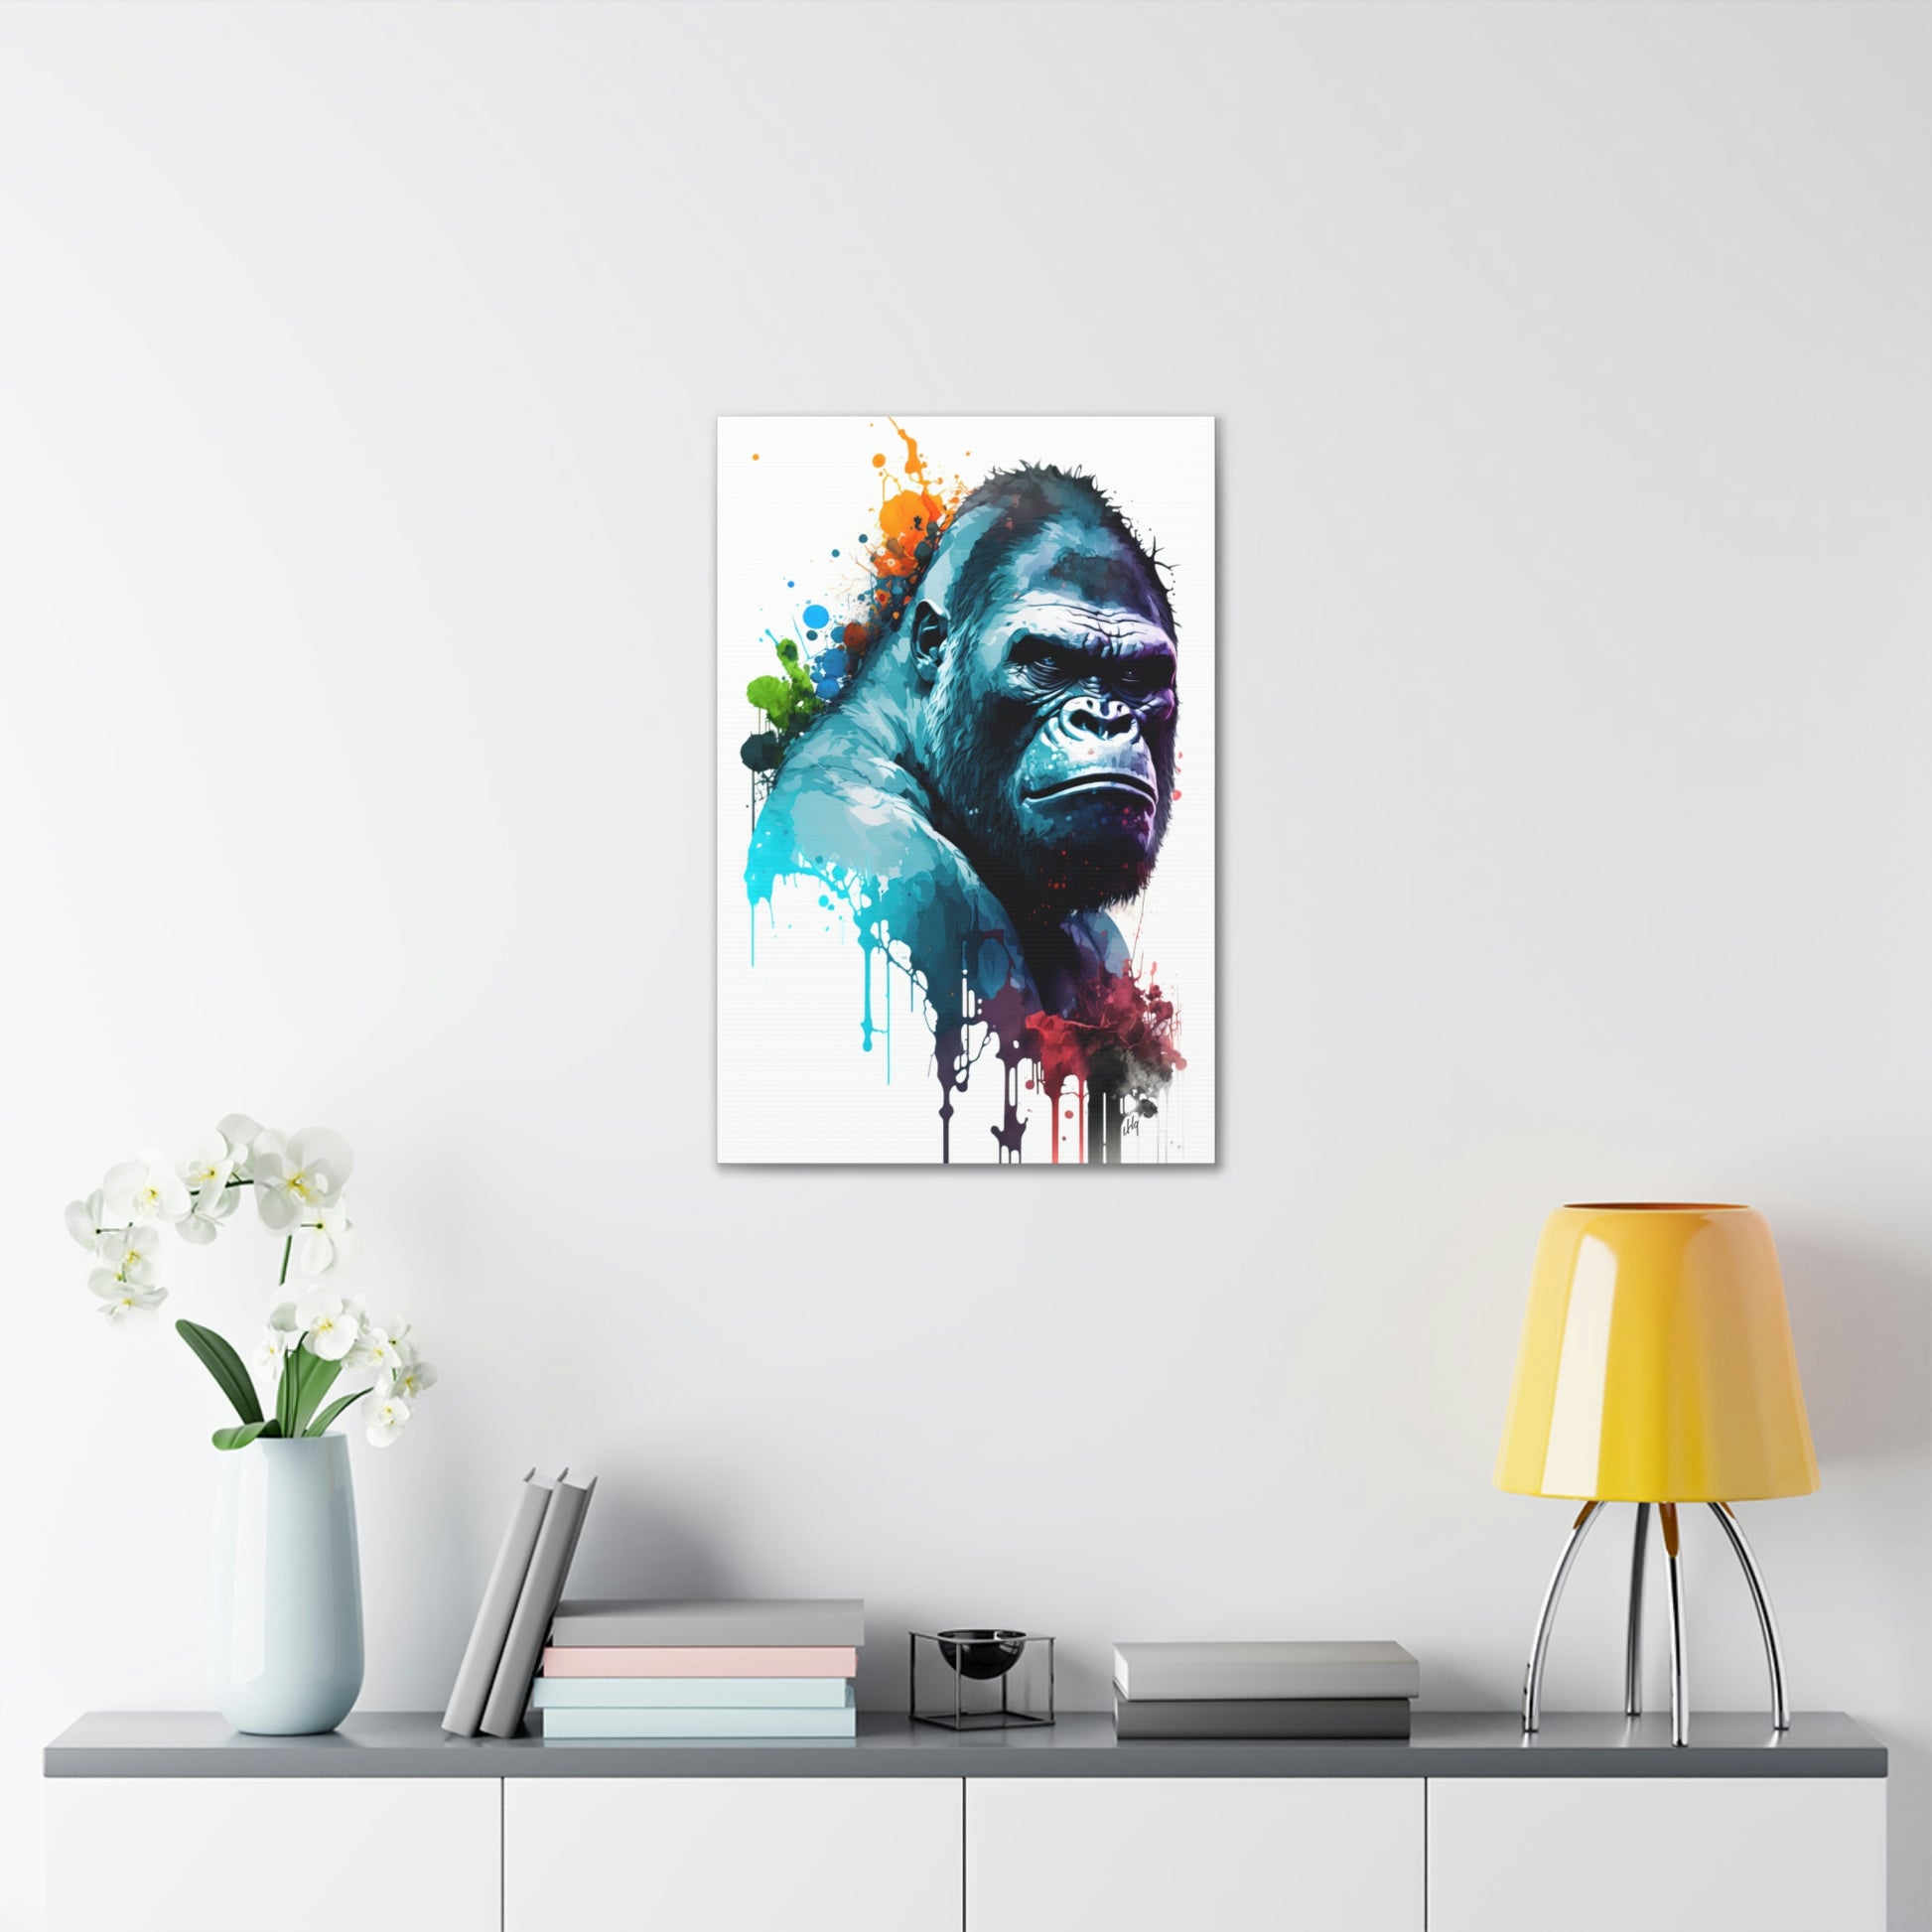 Gorilla Wall Art from the Wildlife Collection, a captivating depiction on canvas, showcasing the powerful presence and depth of this magnificent primate. A must-have for modern wall art aficionados, nature-inspired gallery displays, bold canvas masterpieces, and contemporary art decor enthusiasts.